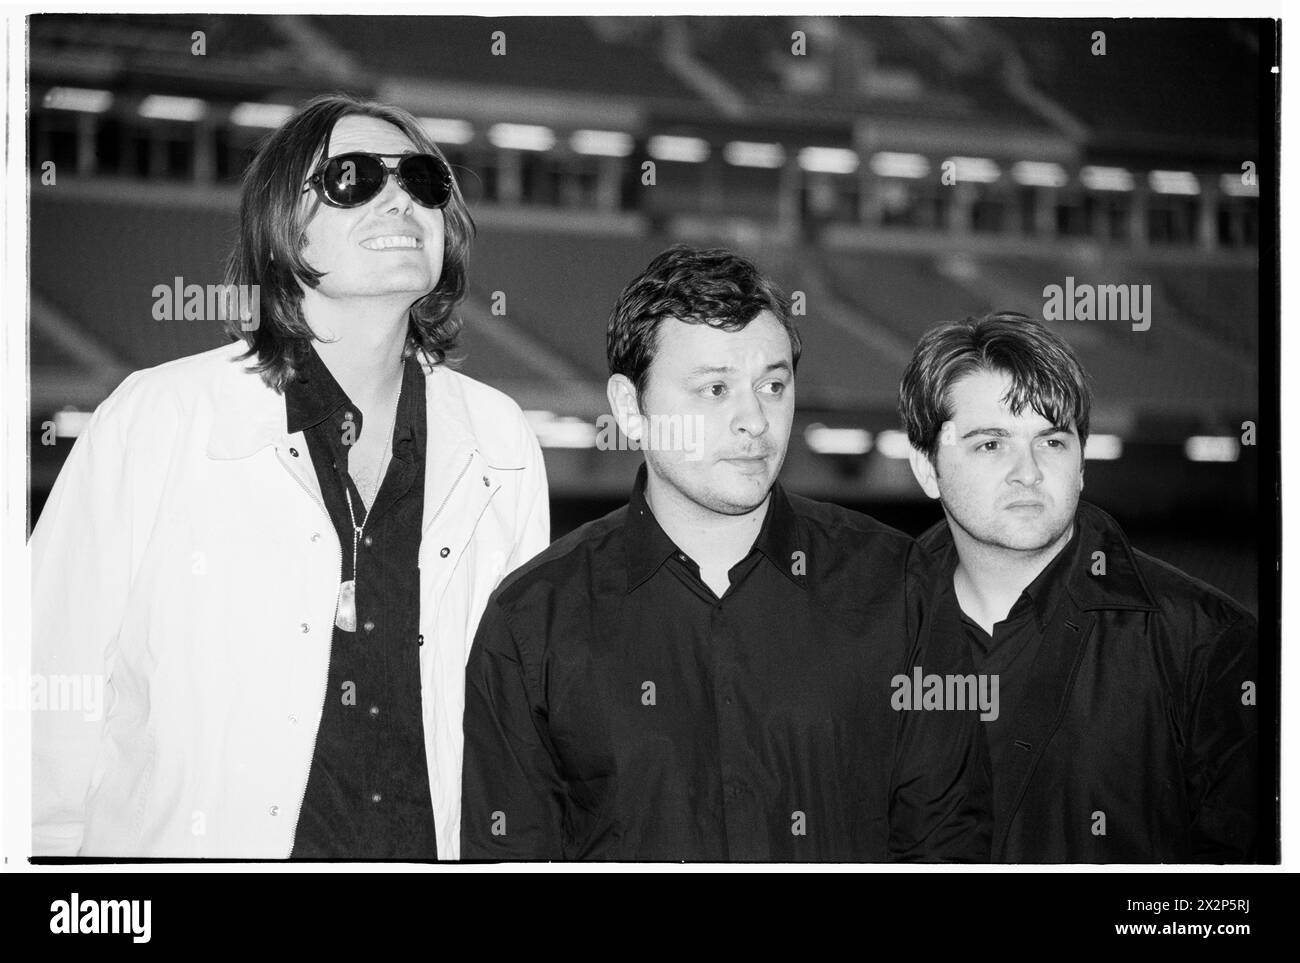 MANIC STREET PREACHERS, PRESS CONFERENCE, 1999: James Dean Bradfield, Nicky Wire and Sean Moore of Welsh band Manic Street Preachers at a Press Conference at Millennium Stadium, Cardiff Wales, UK on 1 November 1999. The band were promoting their millennium night gig in front of more than 57,000 fans on New Year's Eve 1999–2000 at the Millennium Stadium in Cardiff, called 'Leaving The 20th Century'. Photo: Rob Watkins. INFO: Manic Street Preachers, a Welsh rock band formed in 1986, emerged as icons of the '90s British music scene. Known for their politically charged lyrics and anthemic melodies Stock Photo